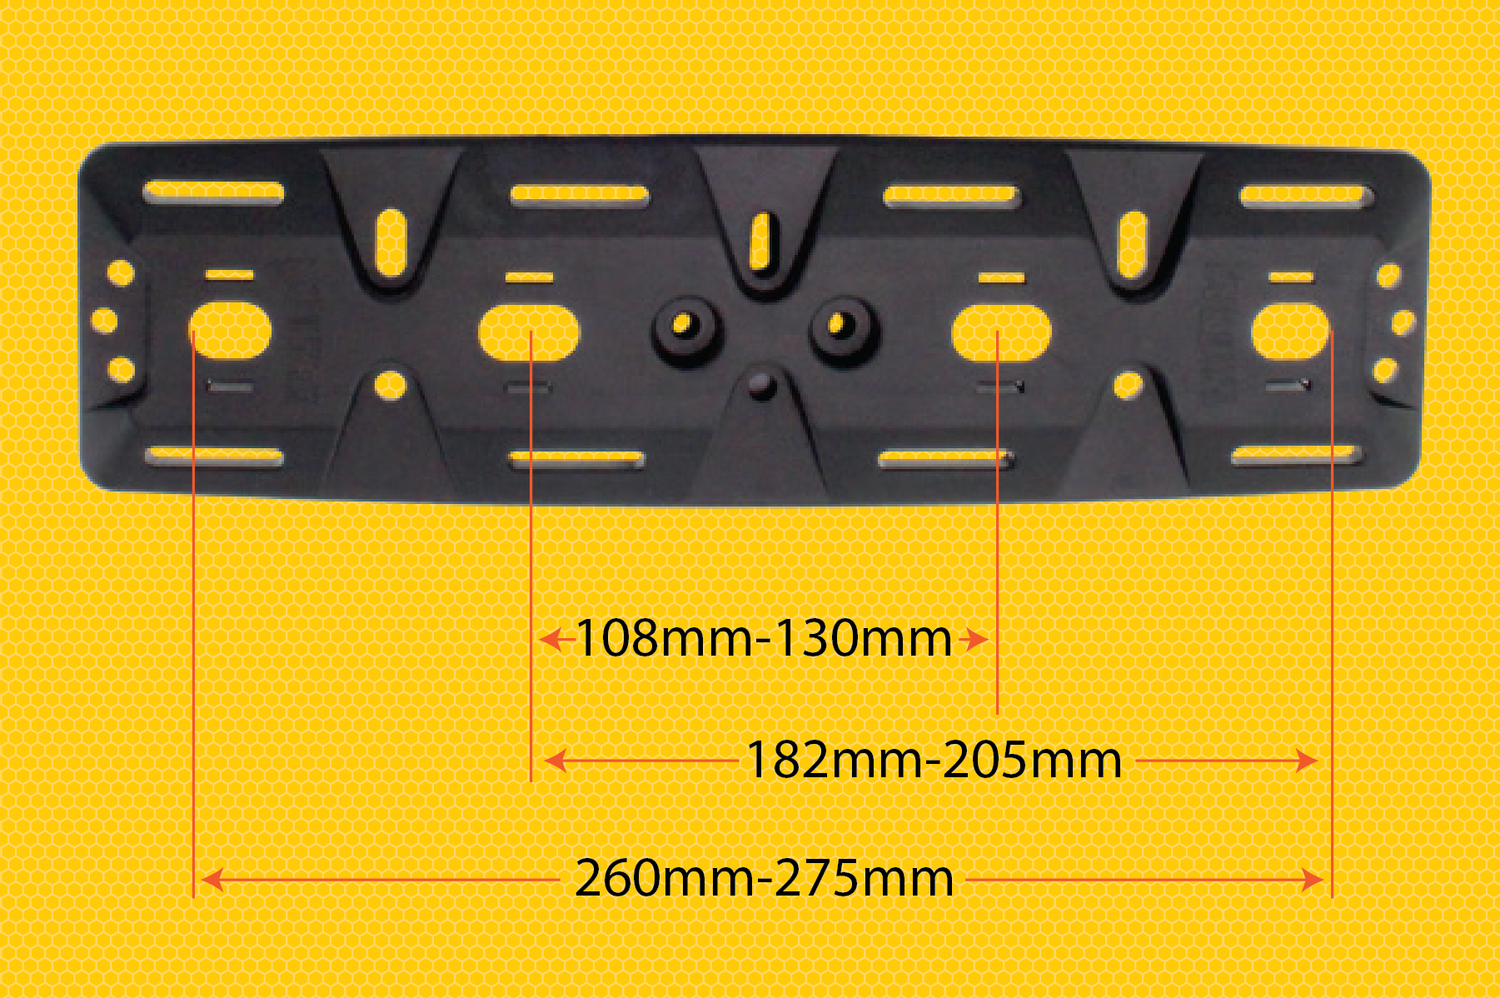 Multiple Adjustable Pin Mounting Points